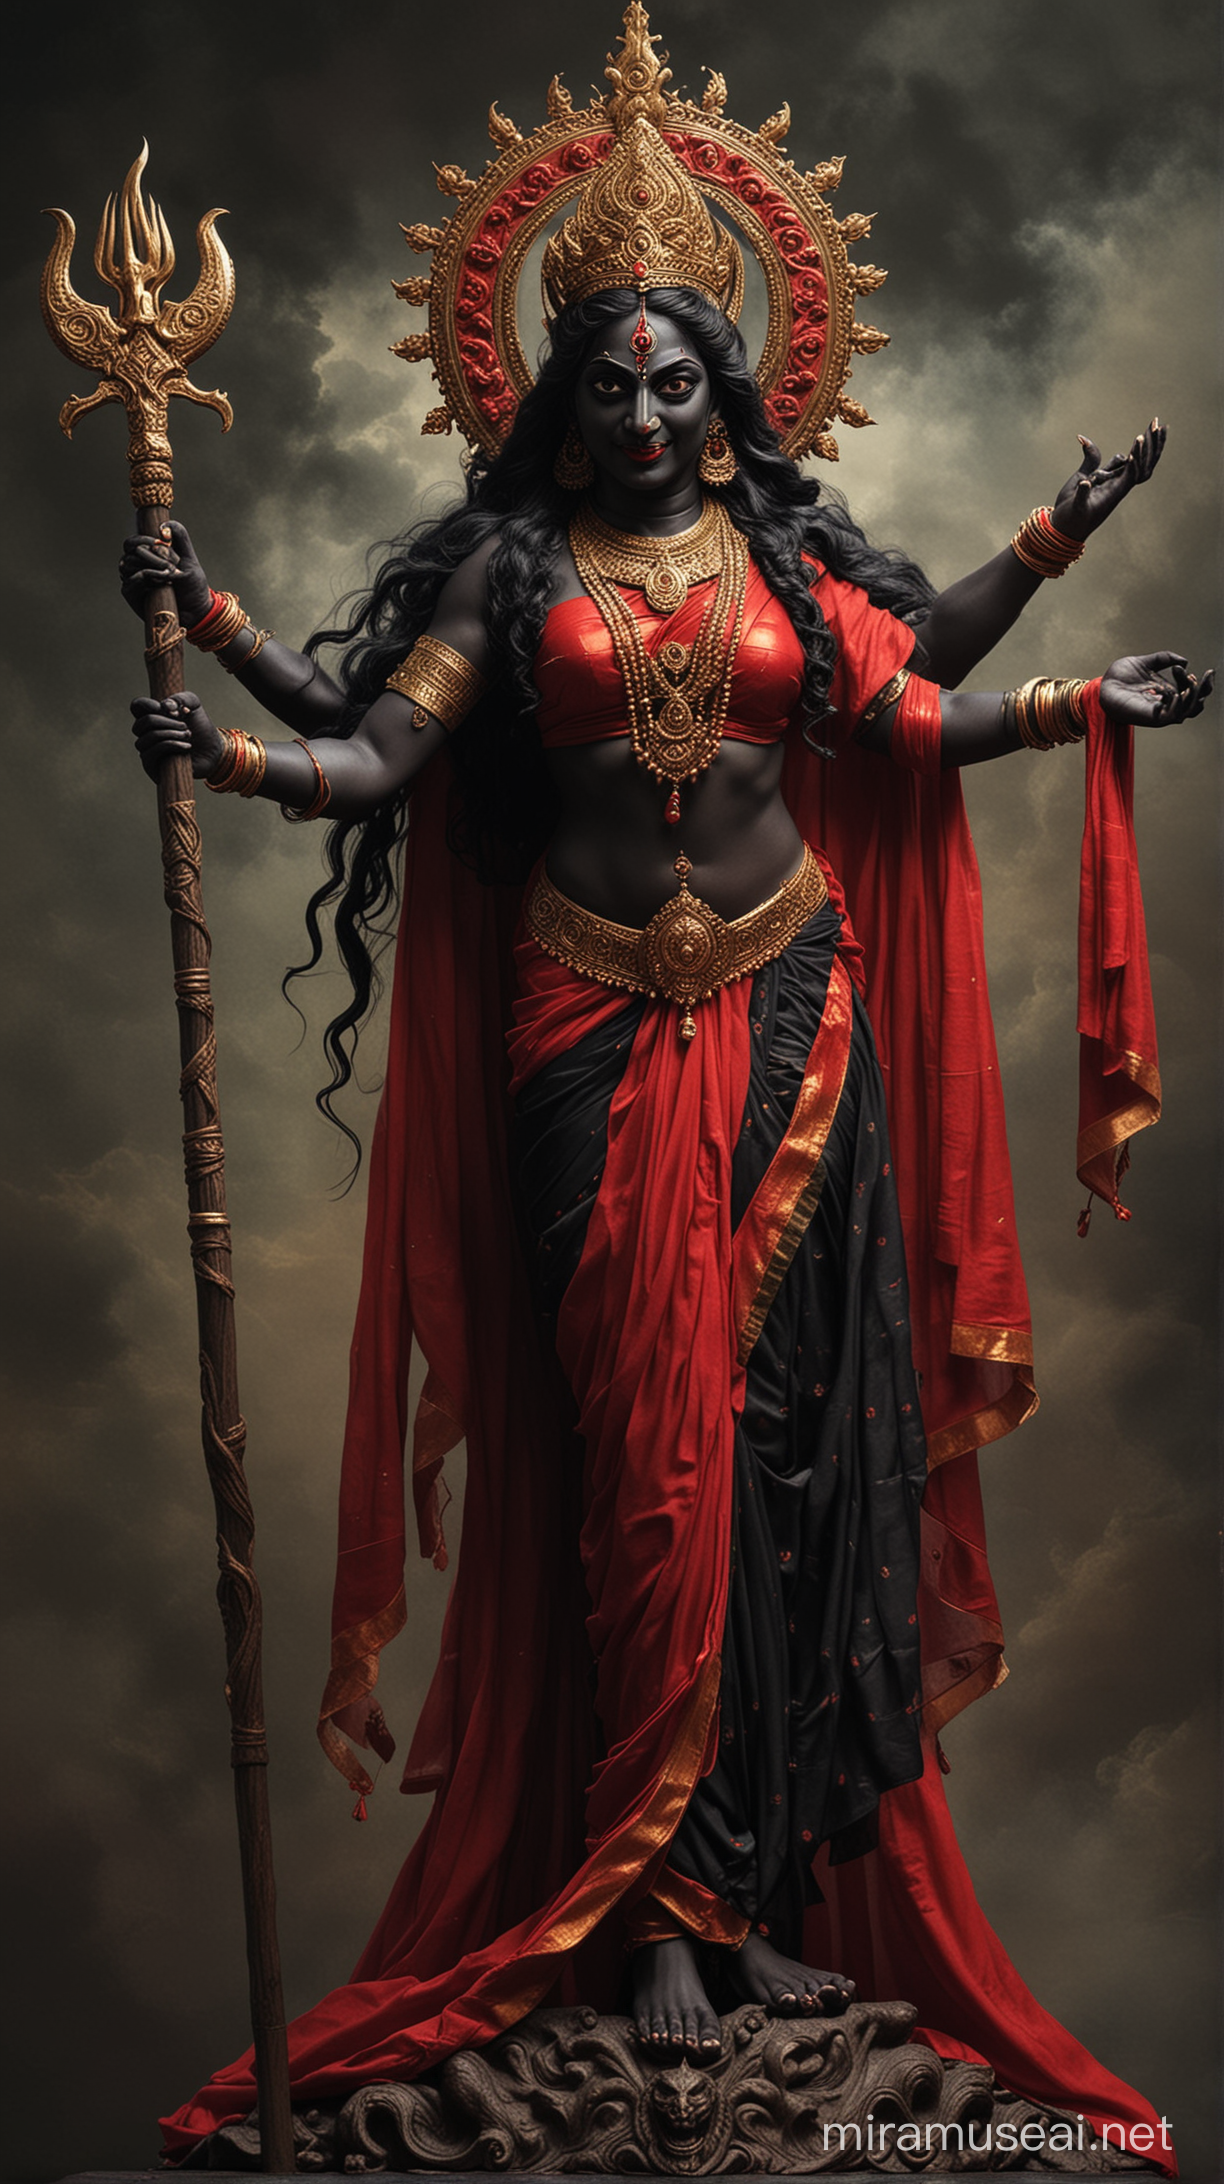 Create a scene depicting  Maa Kali stand on demon body in a victorious stance after defeating  evils Show her  over demons symbolizing her role as a protector  of negativity. Use contrasting colors like black skin and red saree to represent the duality of her nature—fierce yet compassionate.